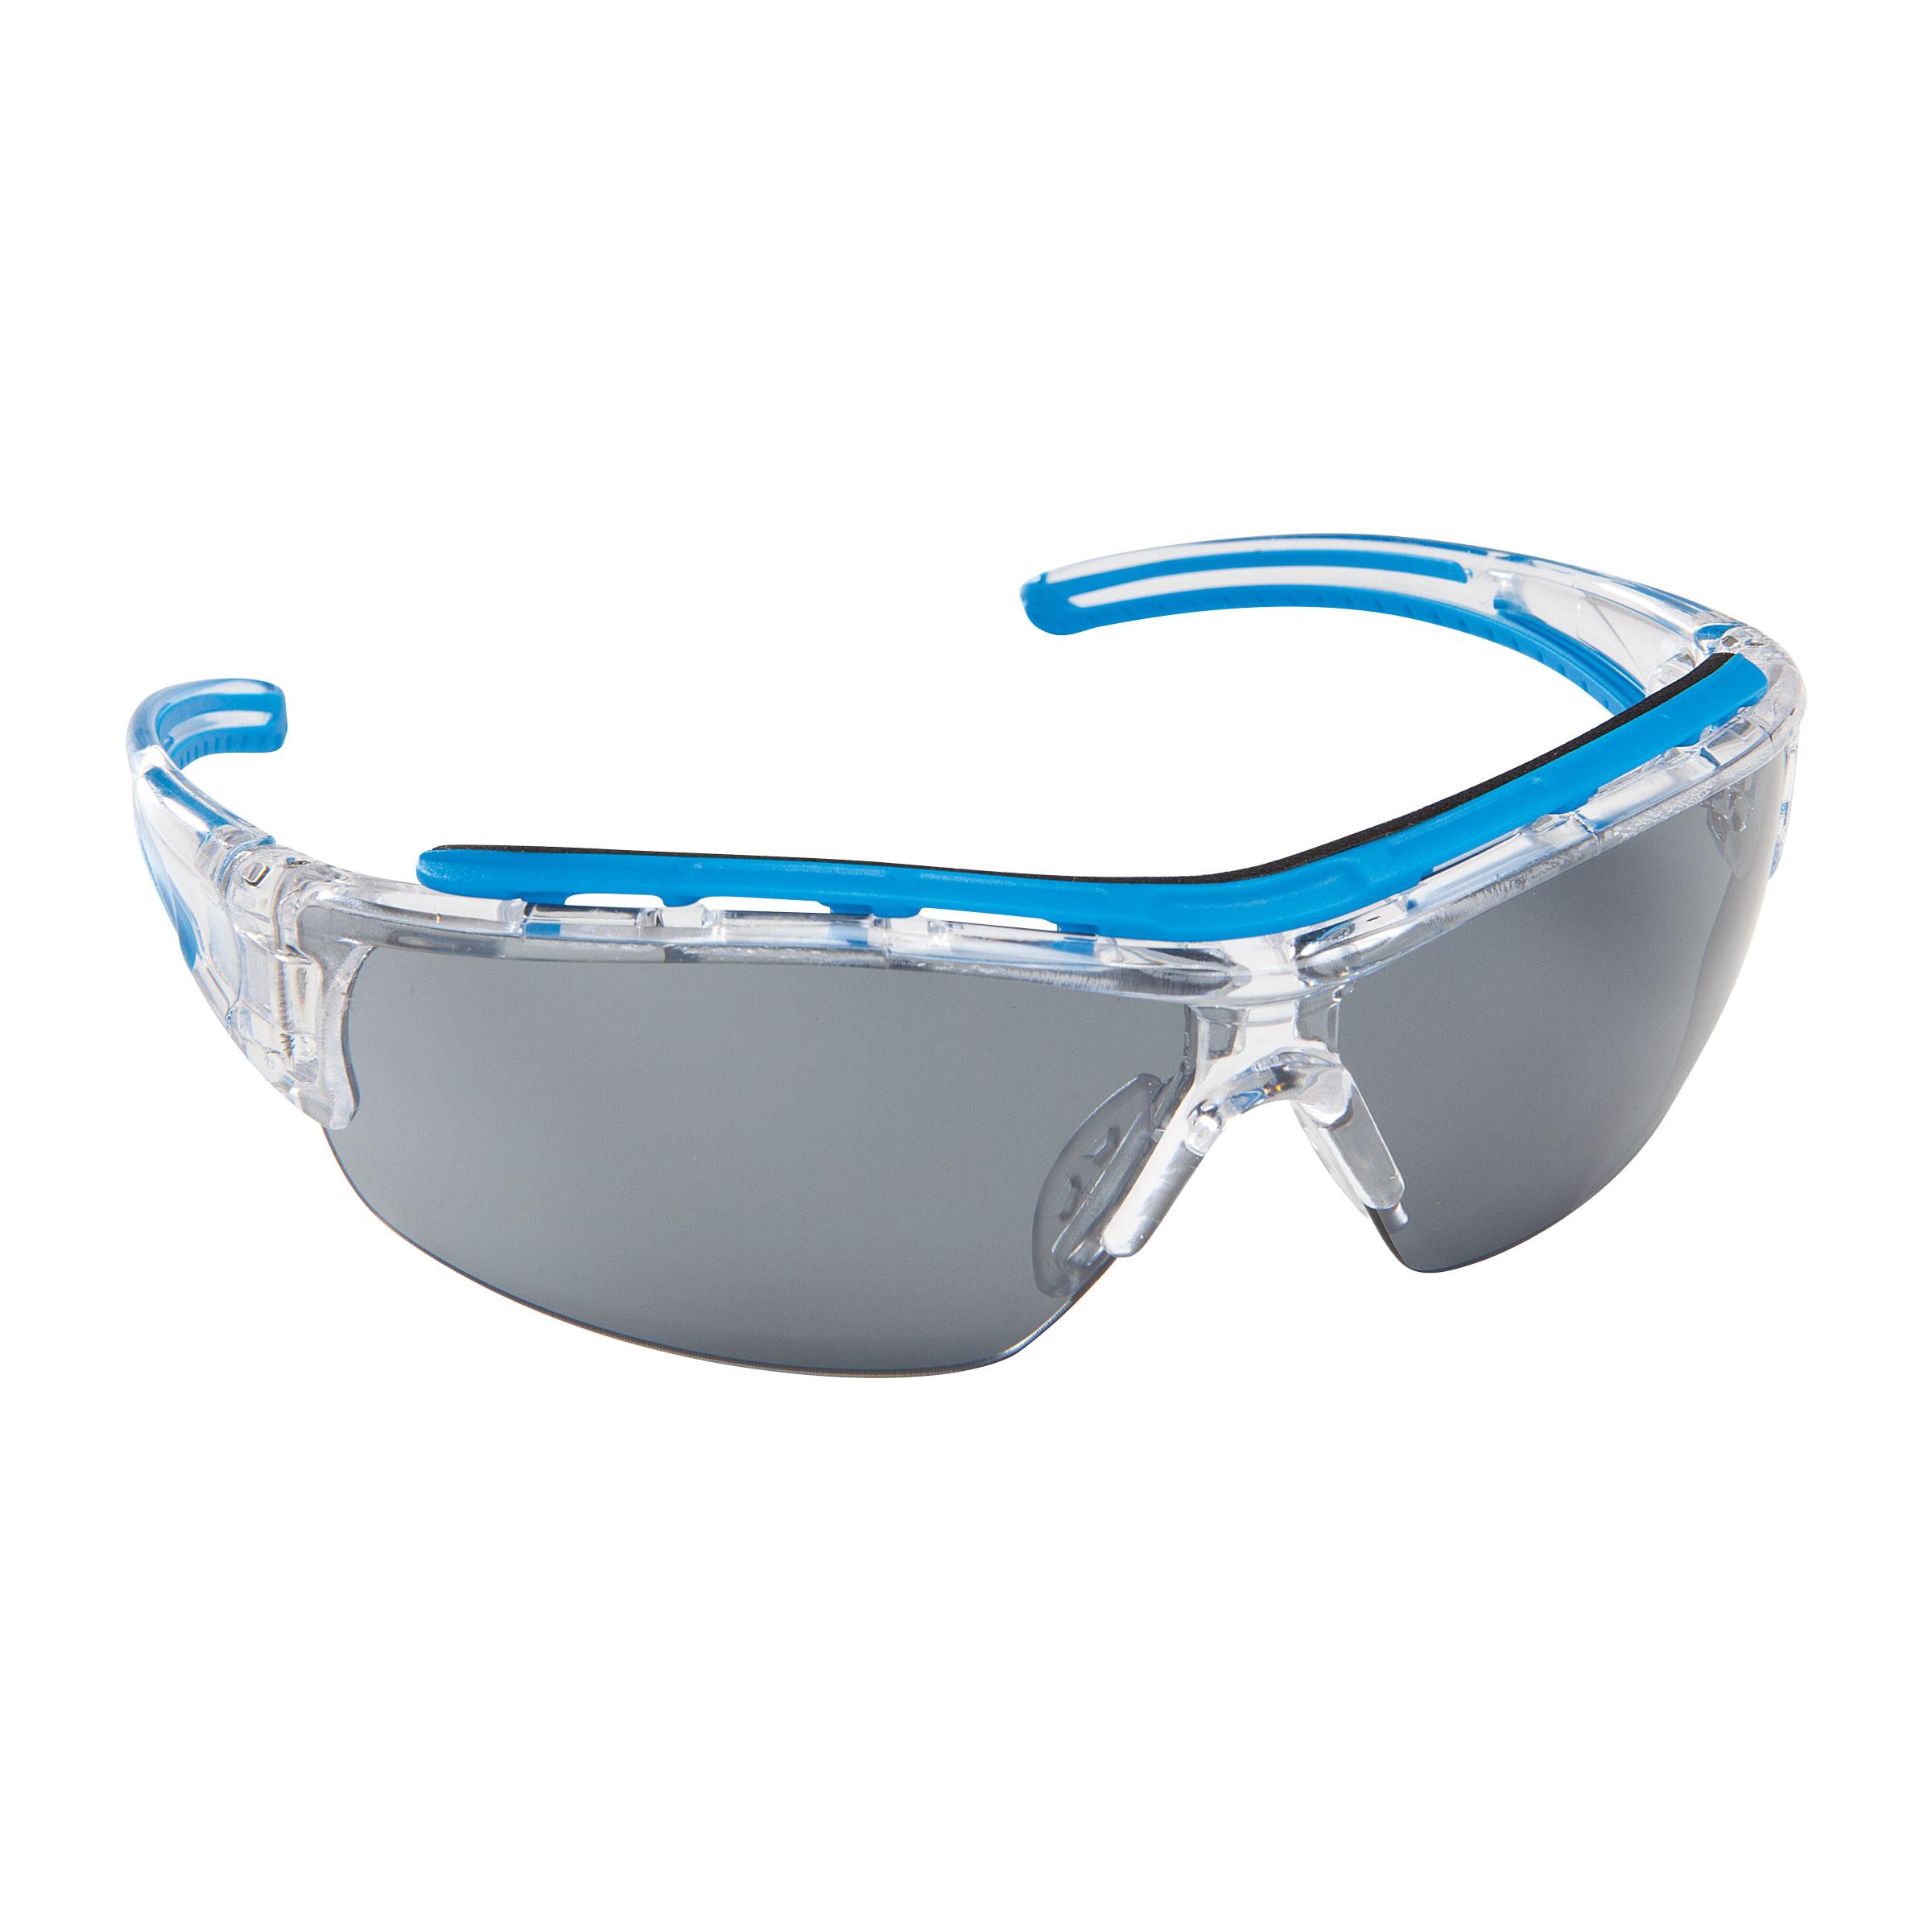 Force360 Shield Smoke Lens Safety Spectacle